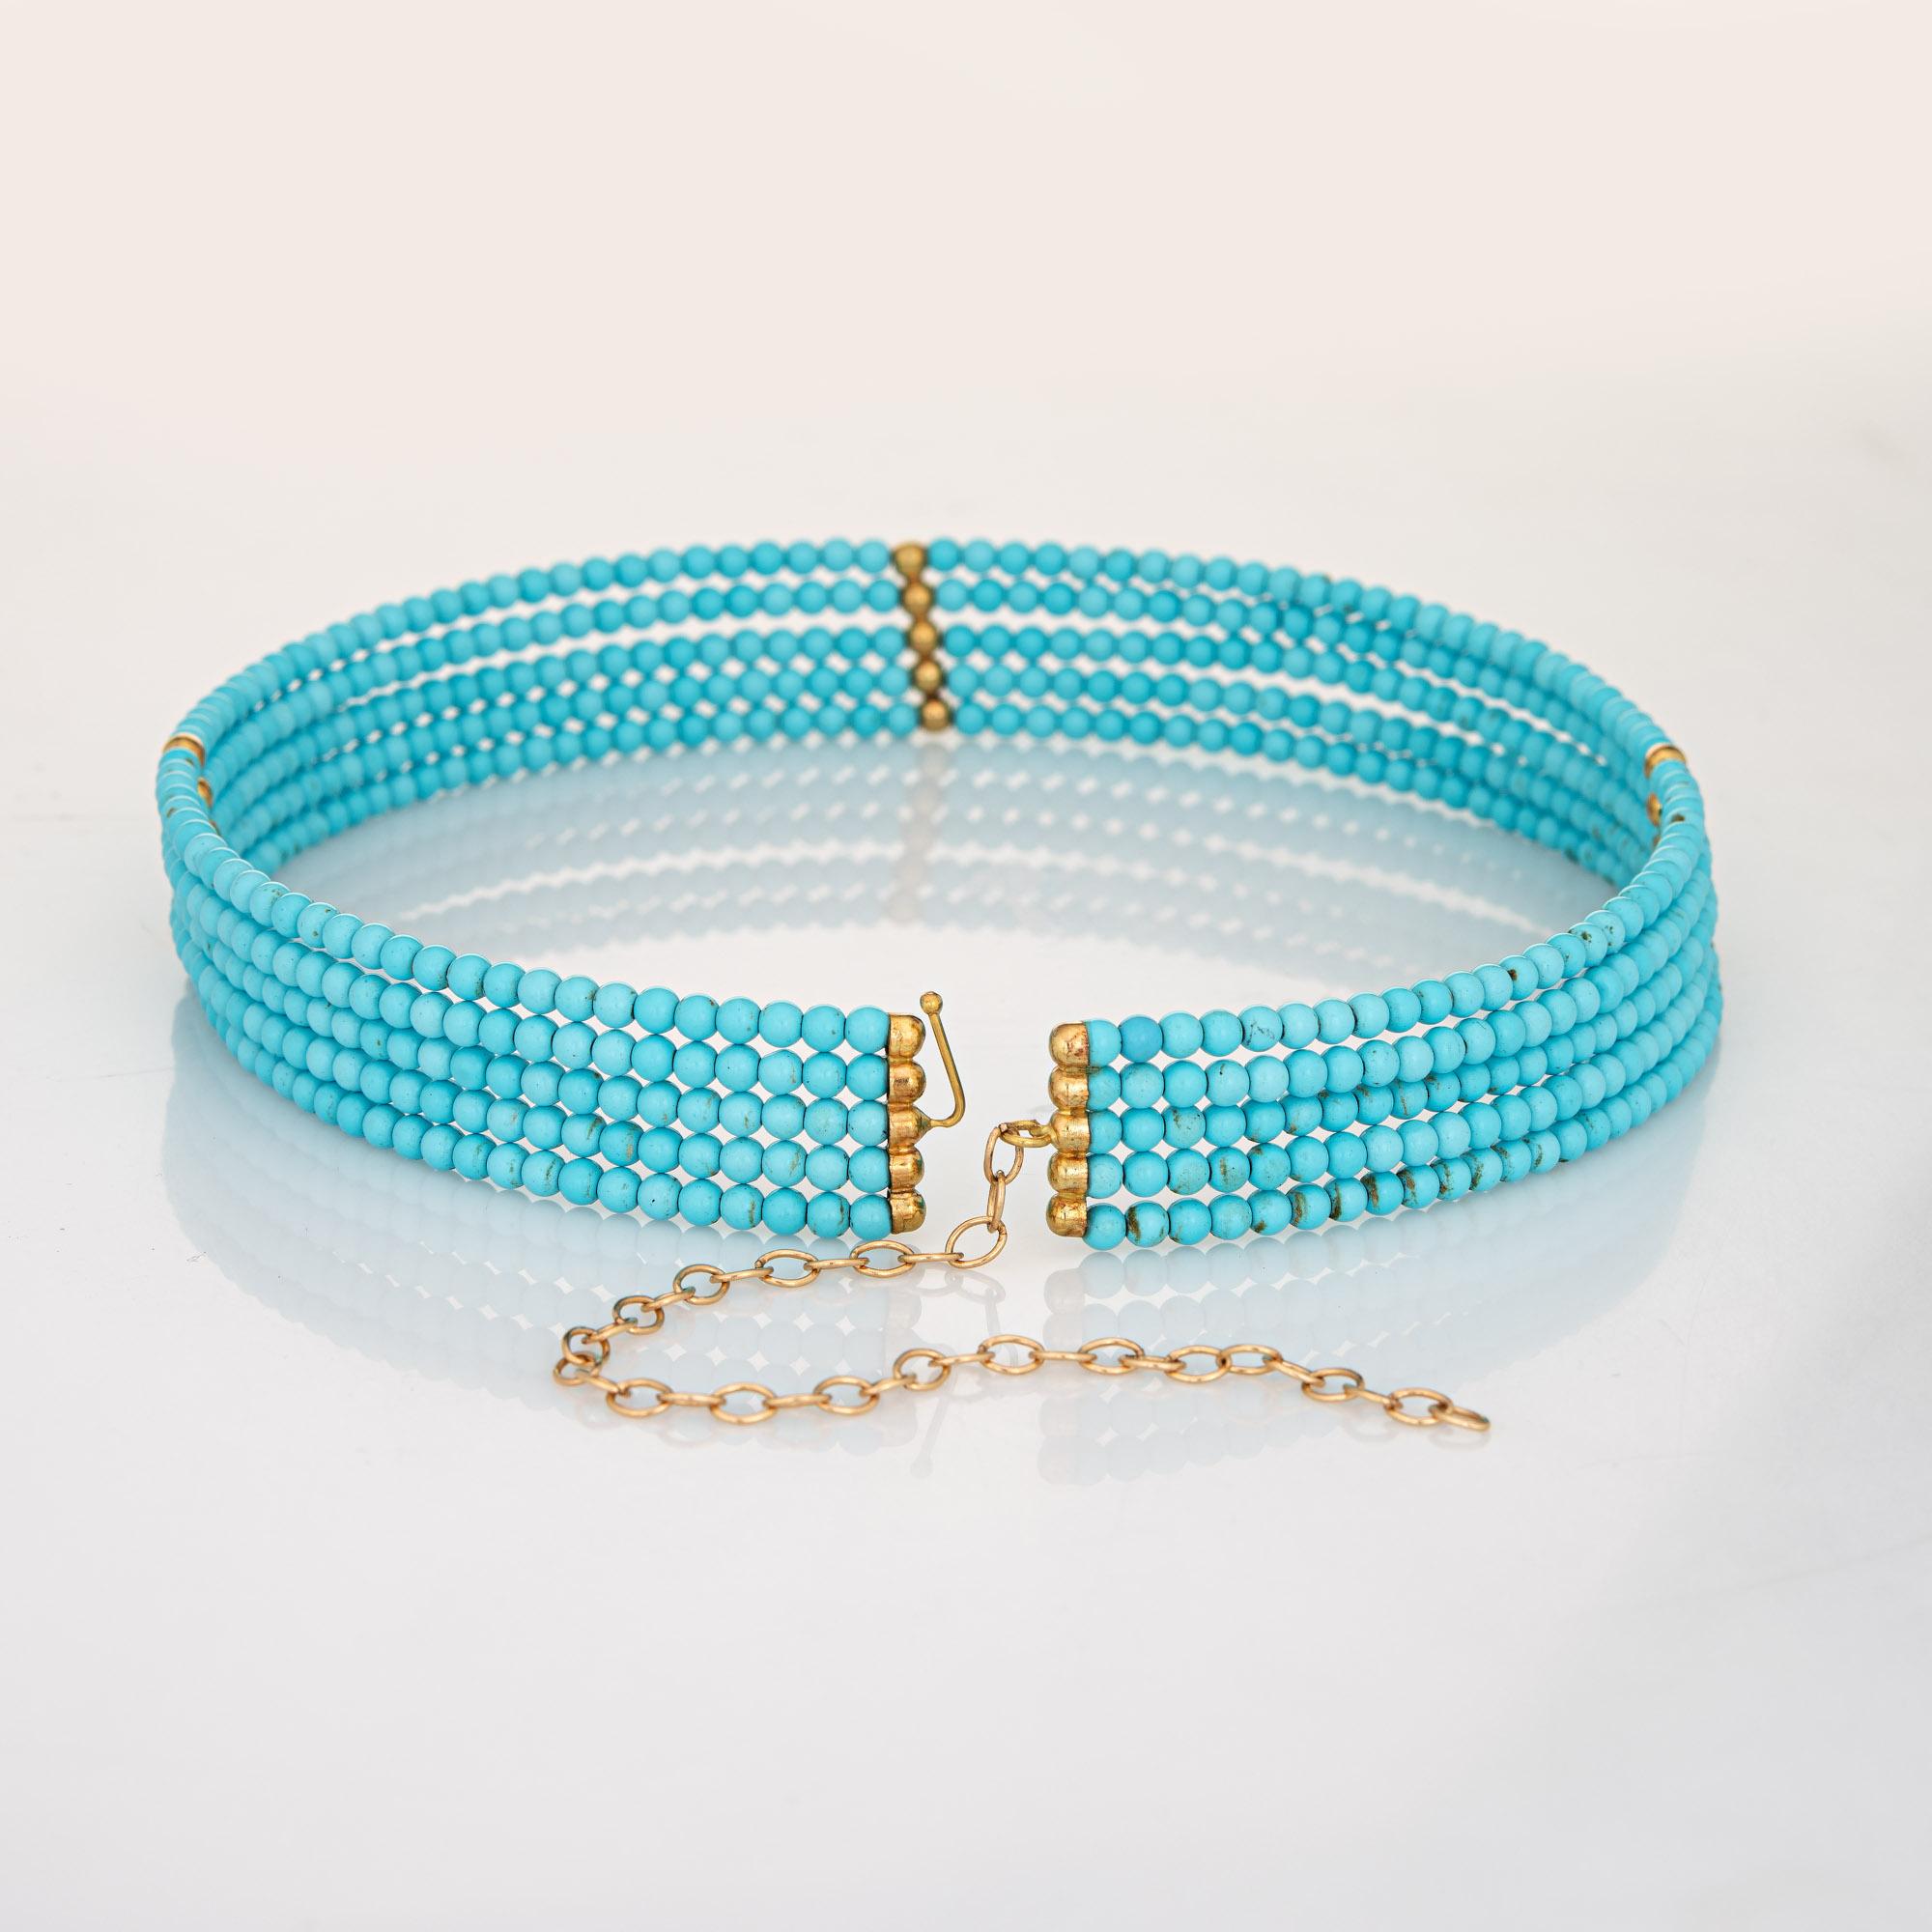 Stylish and finely detailed 5 strand turquoise necklace with 14k yellow gold stations.  

Stabilized turquoise beads are uniform in size and measure 3mm each. The stones are in very good condition and free of cracks or chips.   

The chalky light